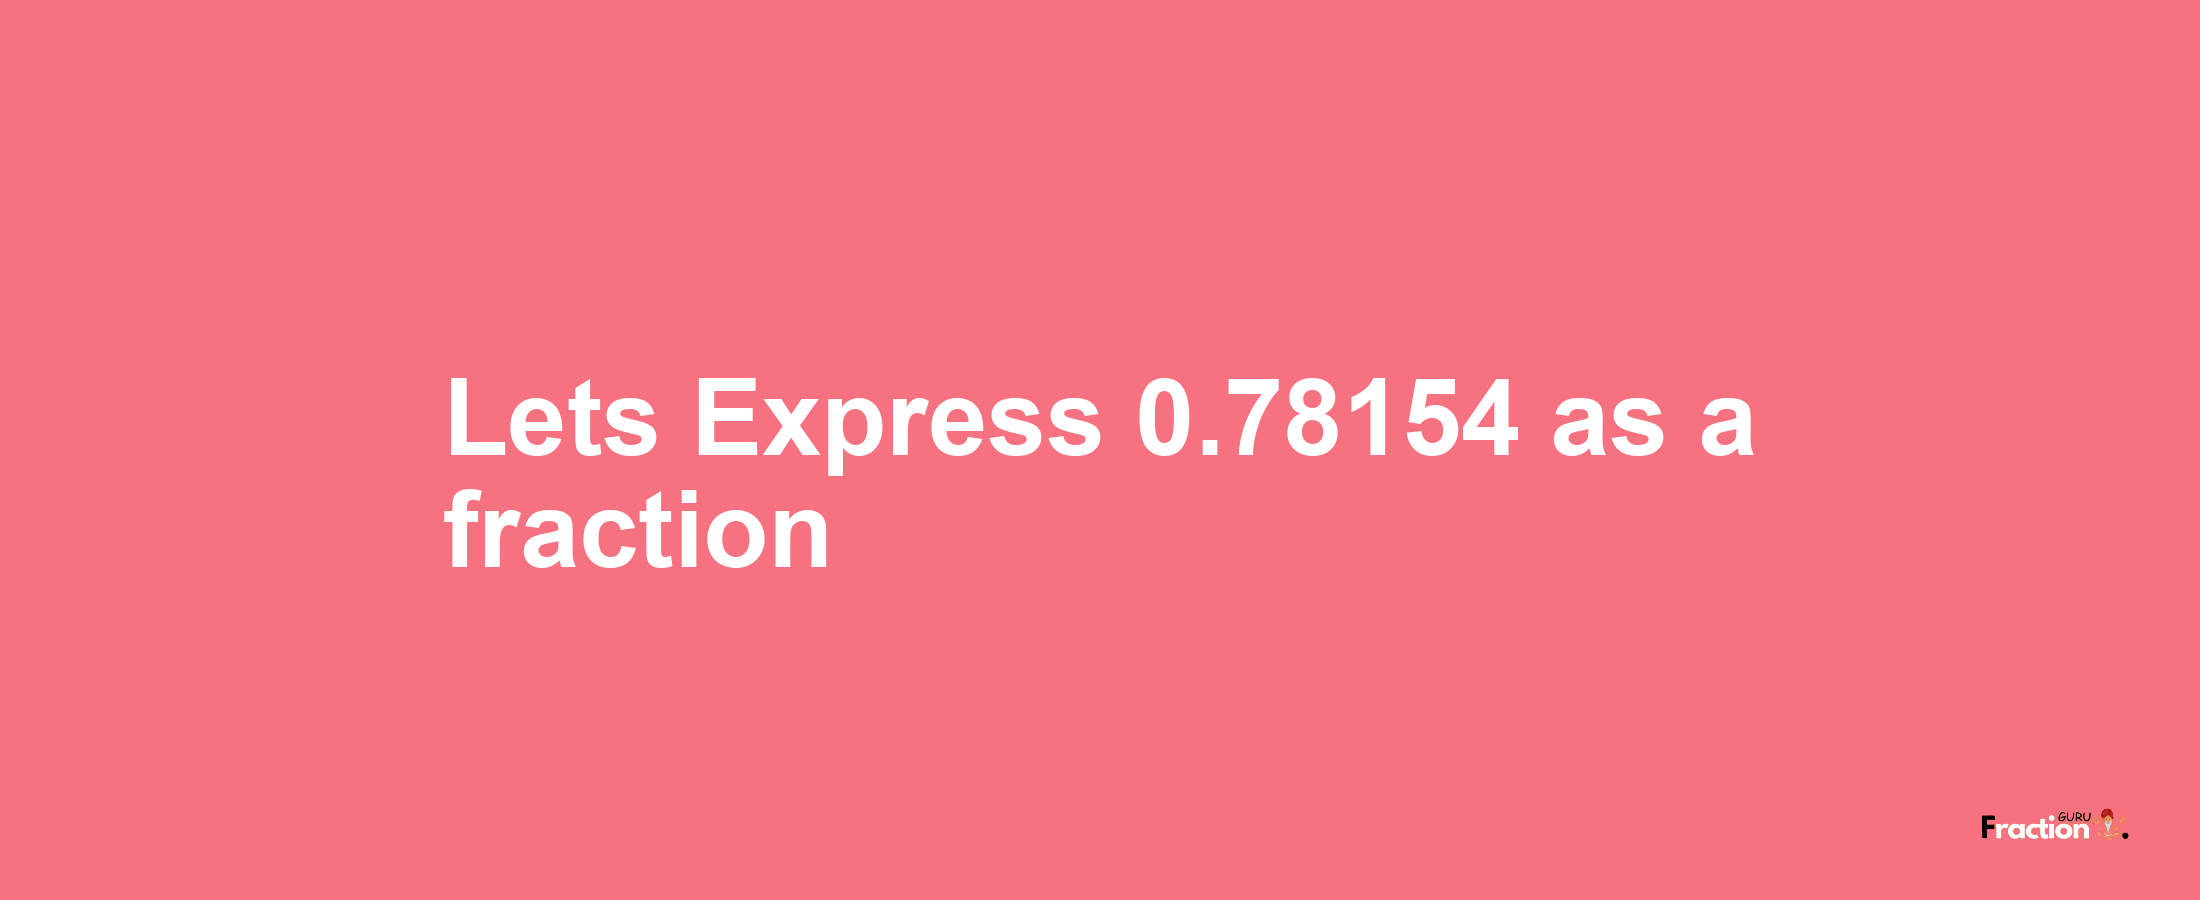 Lets Express 0.78154 as afraction